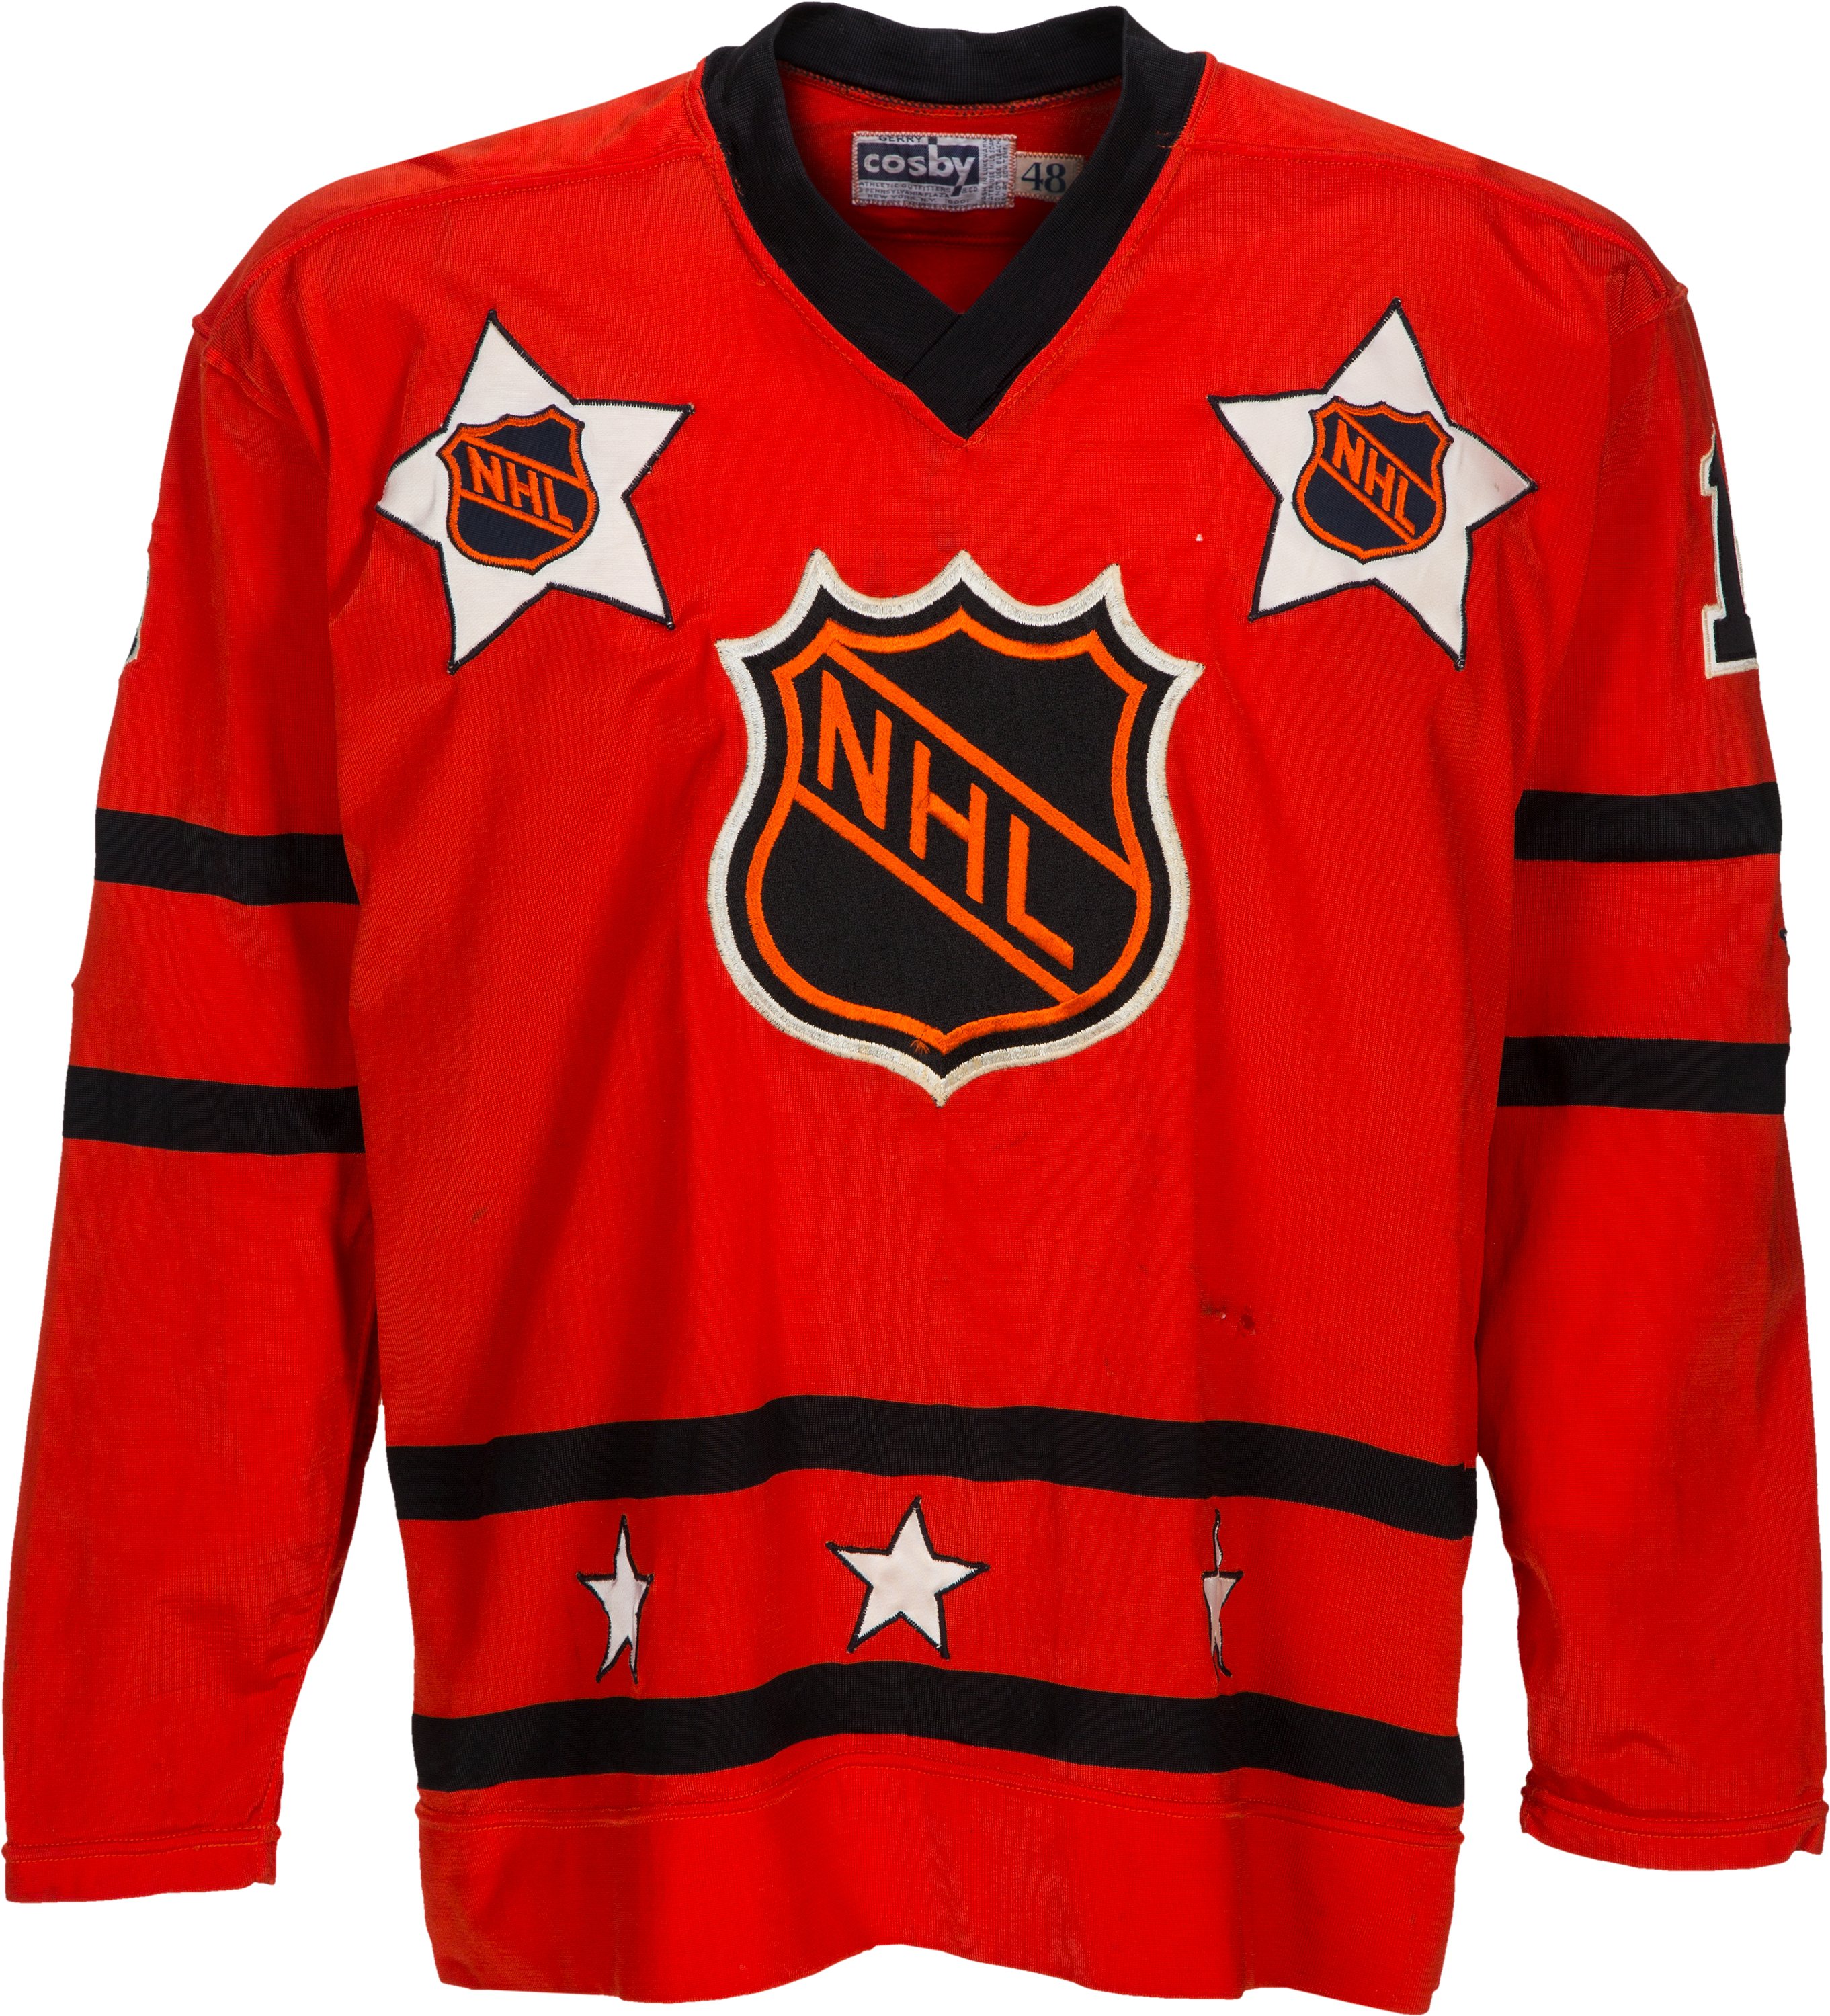 The 2016 NHL All-Star Game jerseys are total snoozers